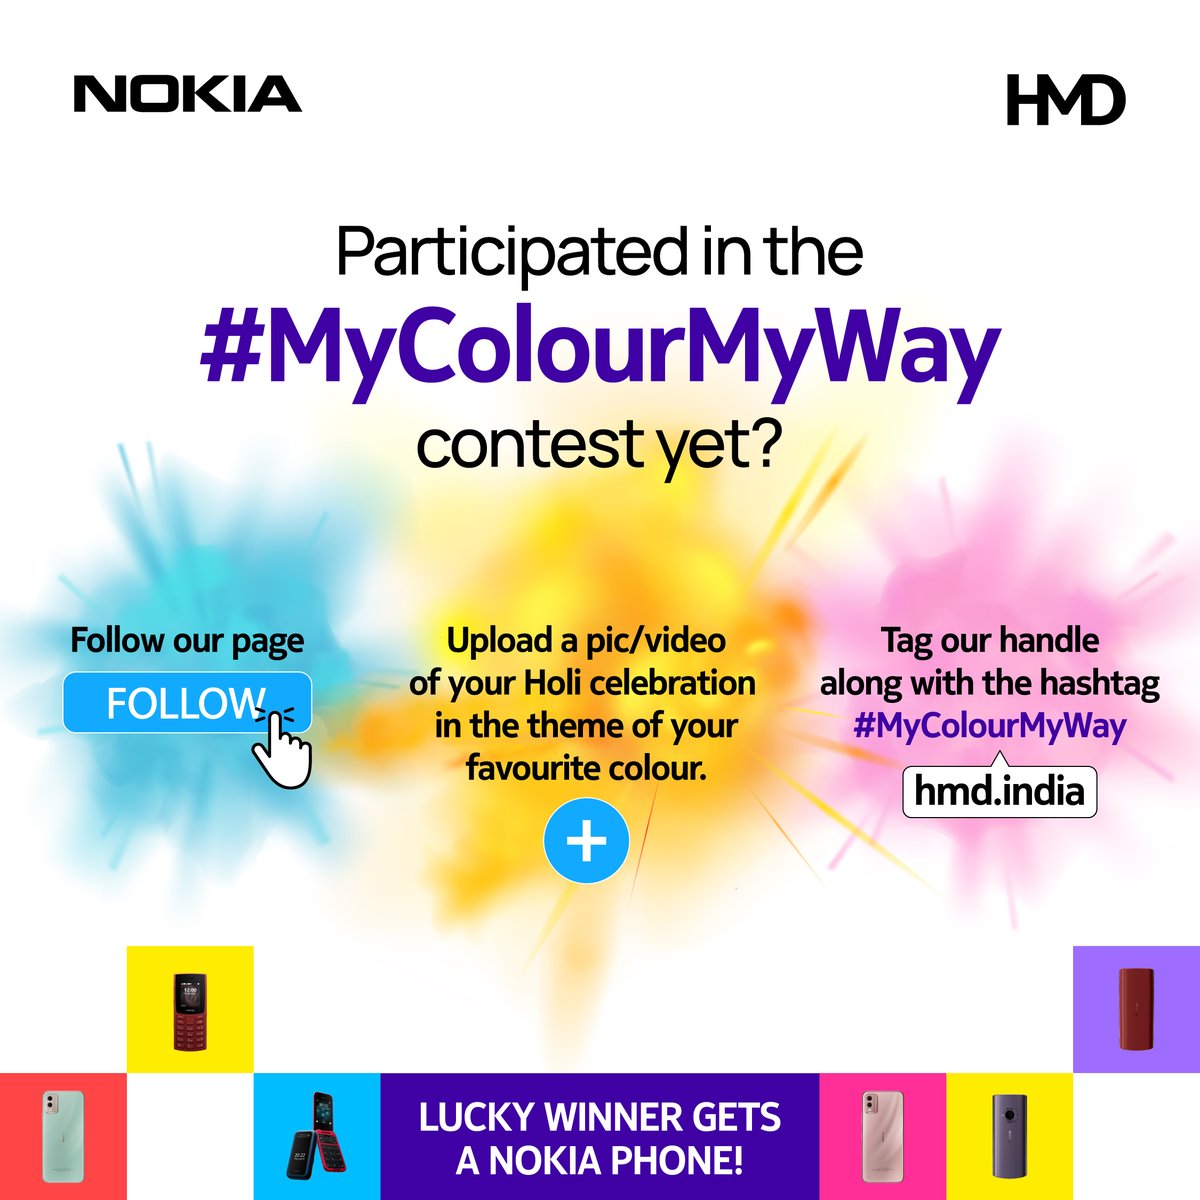 Move over gujiya, thandai and gulaal! Your celebrations are still missing a brand-new Nokia device that’s up for grabs in our Holi contest. Participate today and stand a chance to win it! #HoliContest #HMD #Nokiaphones #HappyHoli TnC: rb.gy/mtm5x7